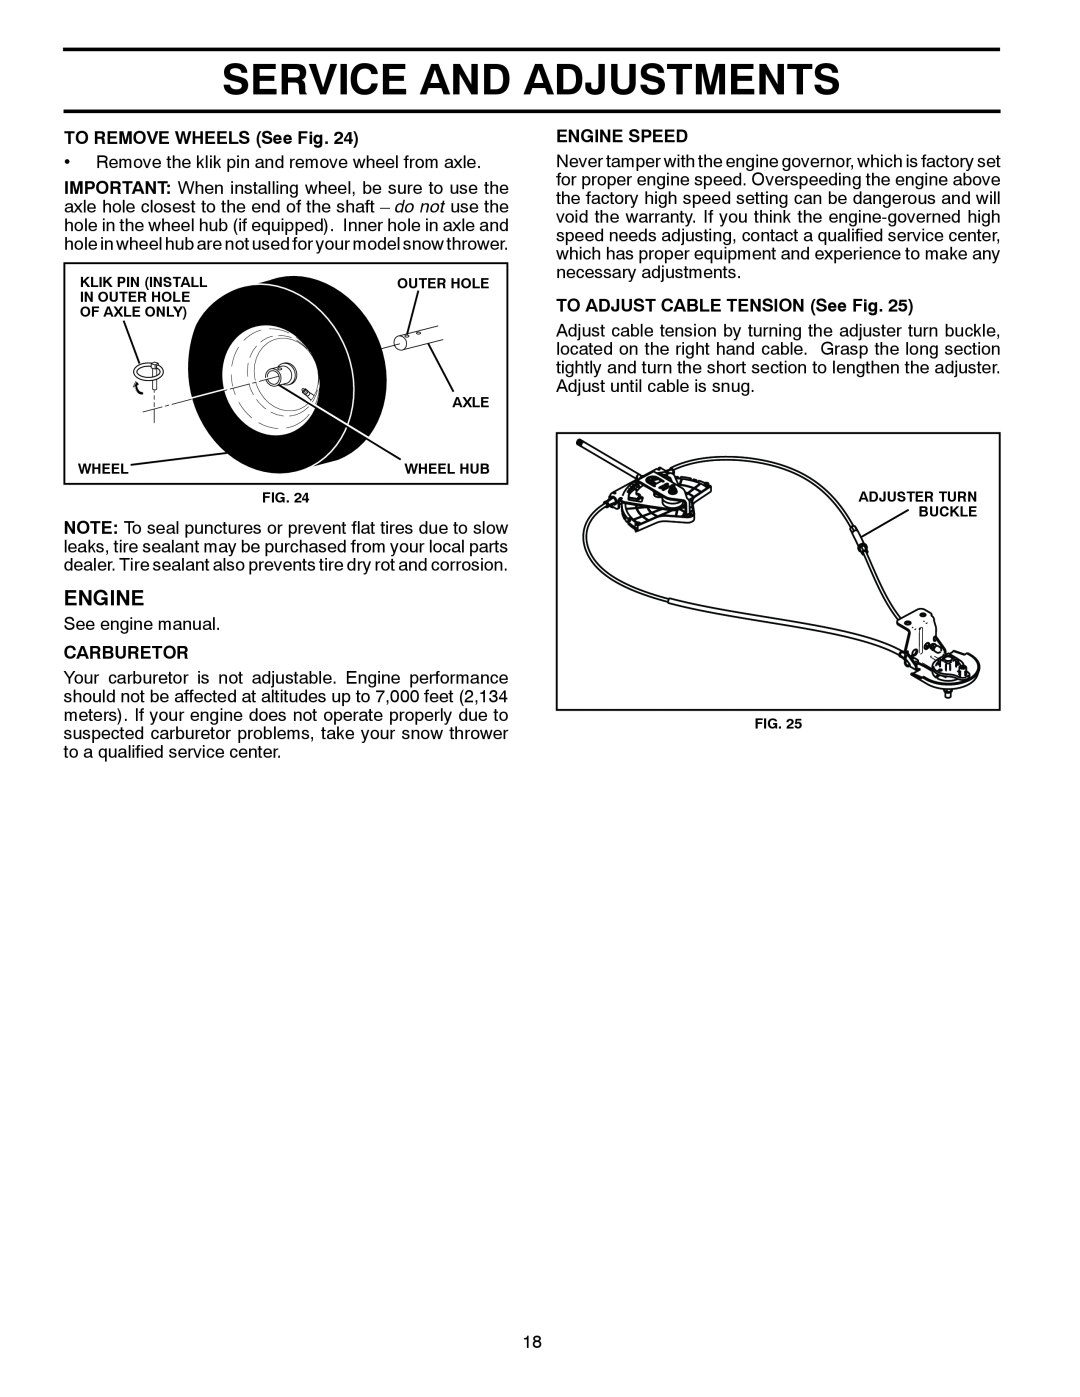 Poulan 429896, 96192003201 owner manual Service And Adjustments, TO REMOVE WHEELS See Fig, Carburetor, Engine Speed 